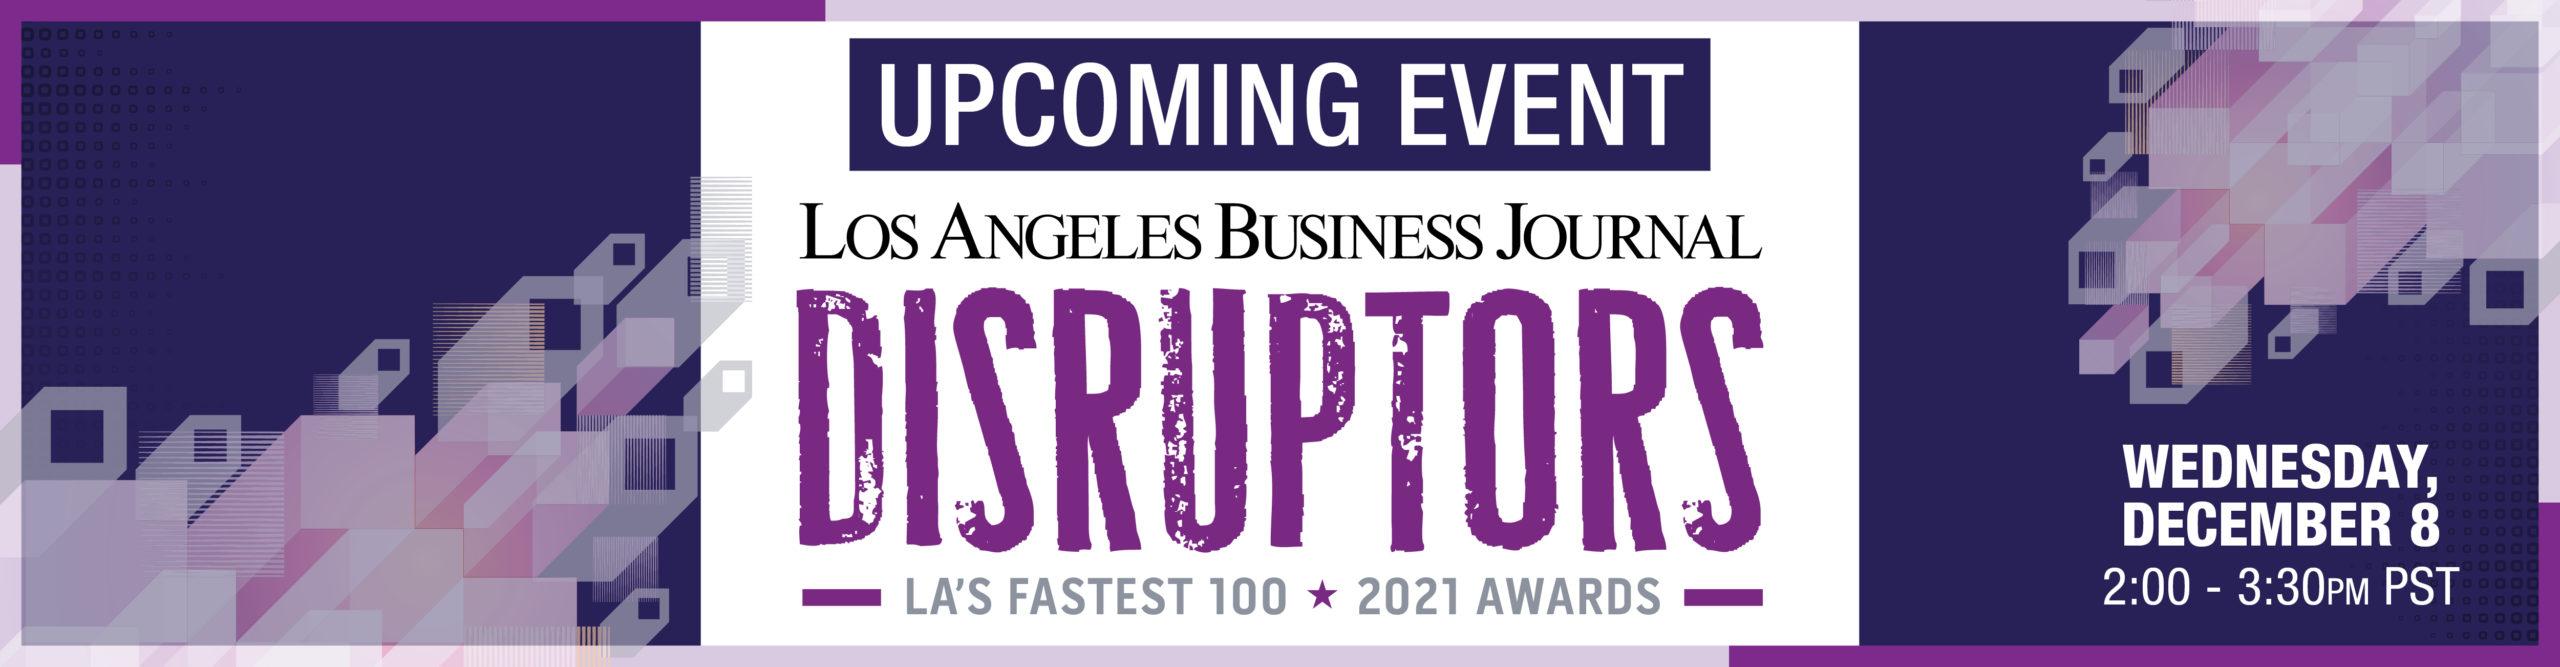 Los Angeles Business Journal Current and Upcoming Event